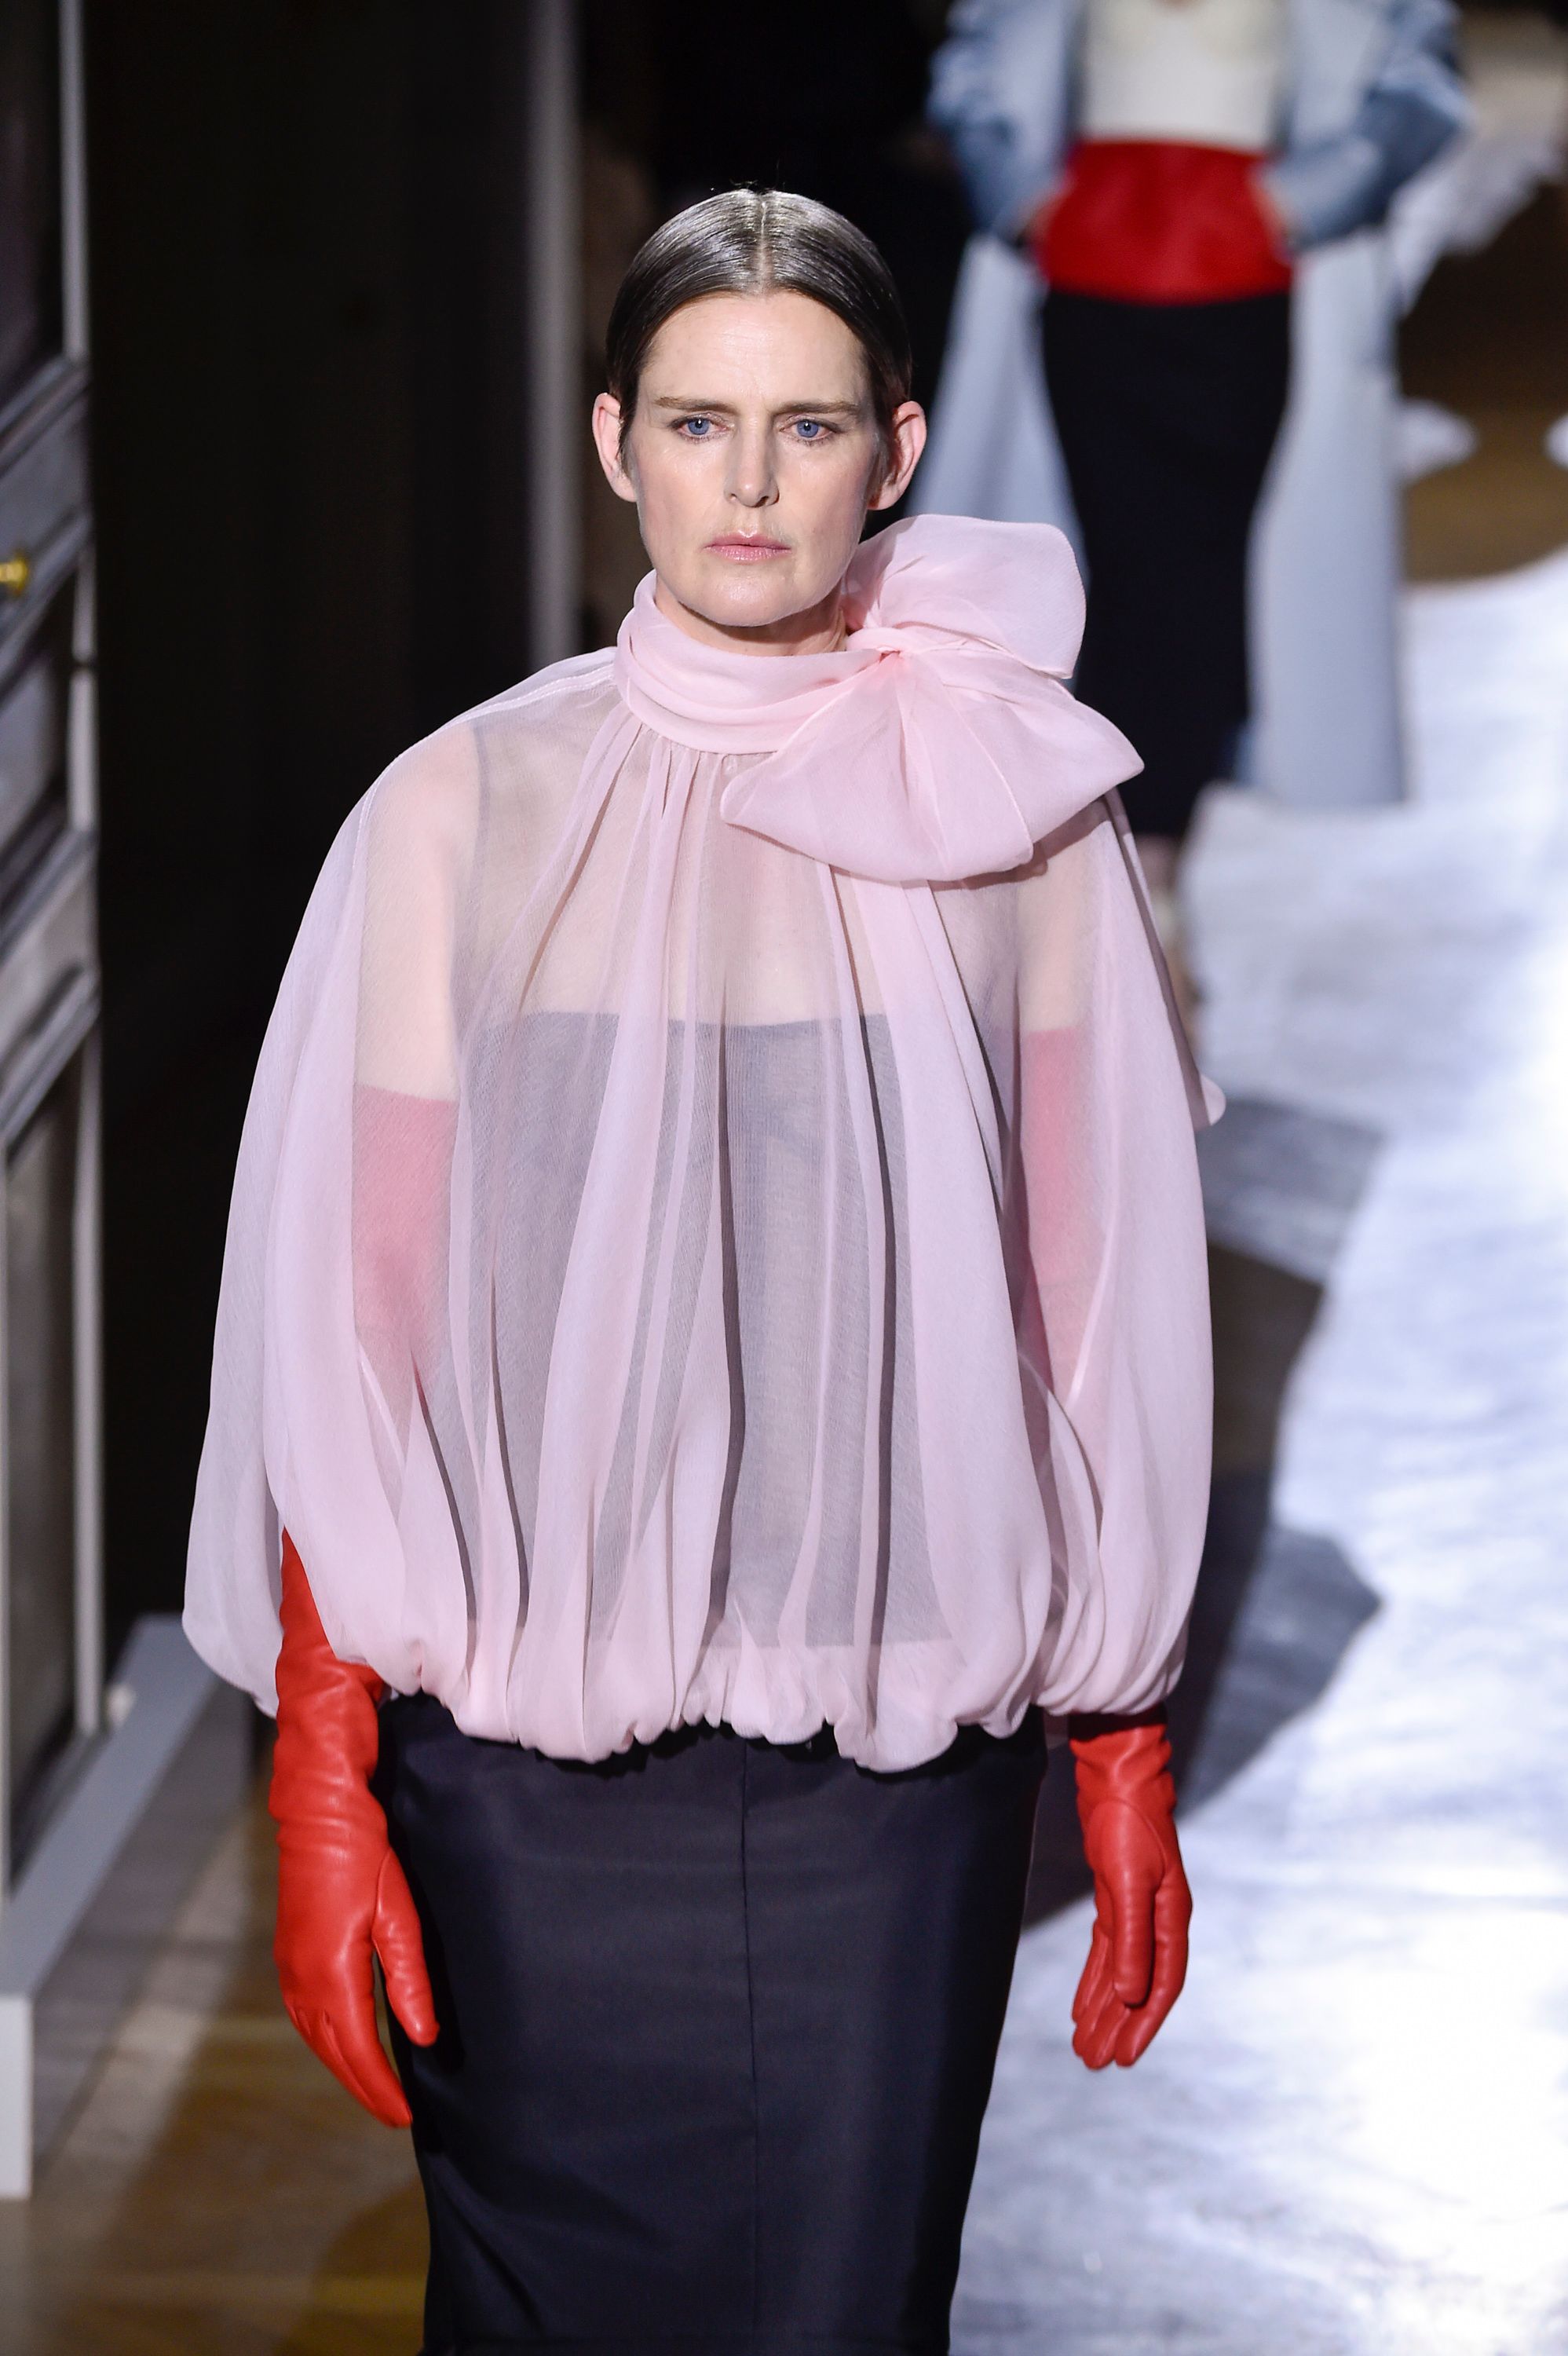 Stella Tennant walks the runway during the Valentino Haute Couture Spring/Summer 2020 at the Paris Fashion Week on January 22, 2020 in France. | Photo: Getty Images